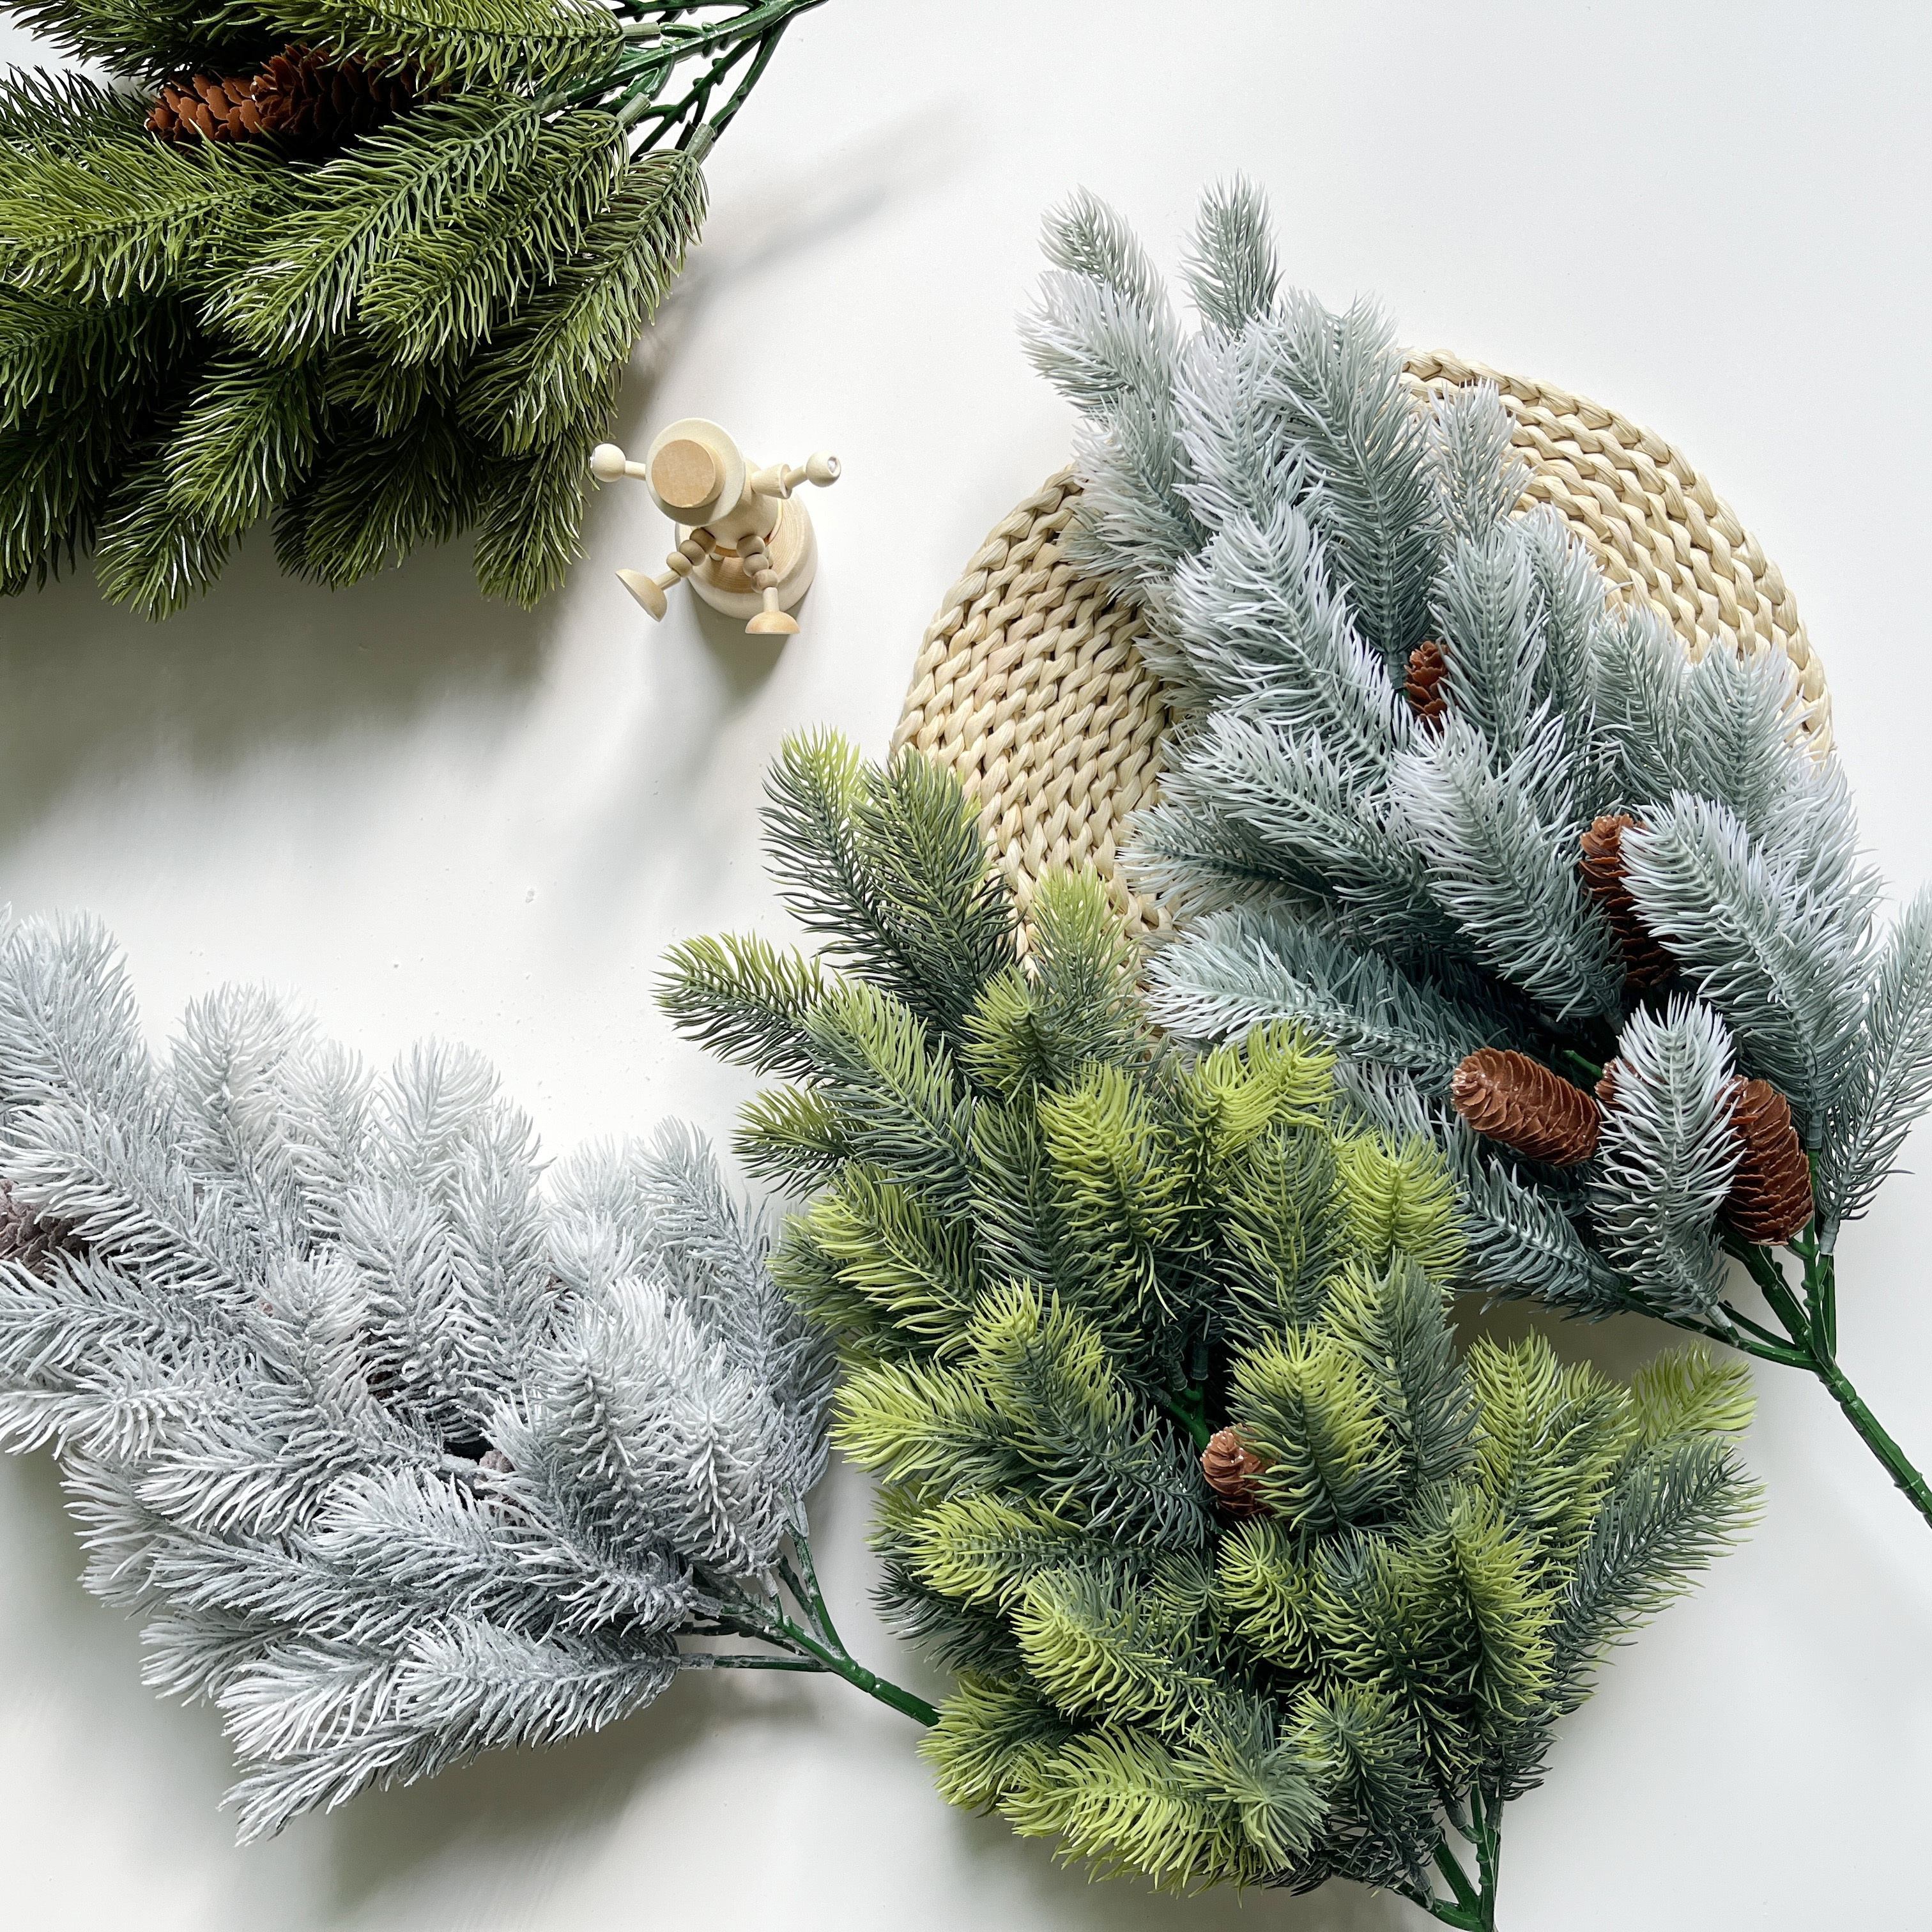 Christmas Picks Floral Picks Christmas Greenery Artificial Pine Branches  for Garland Crafts Home Decoration 13.7 50Pcs 